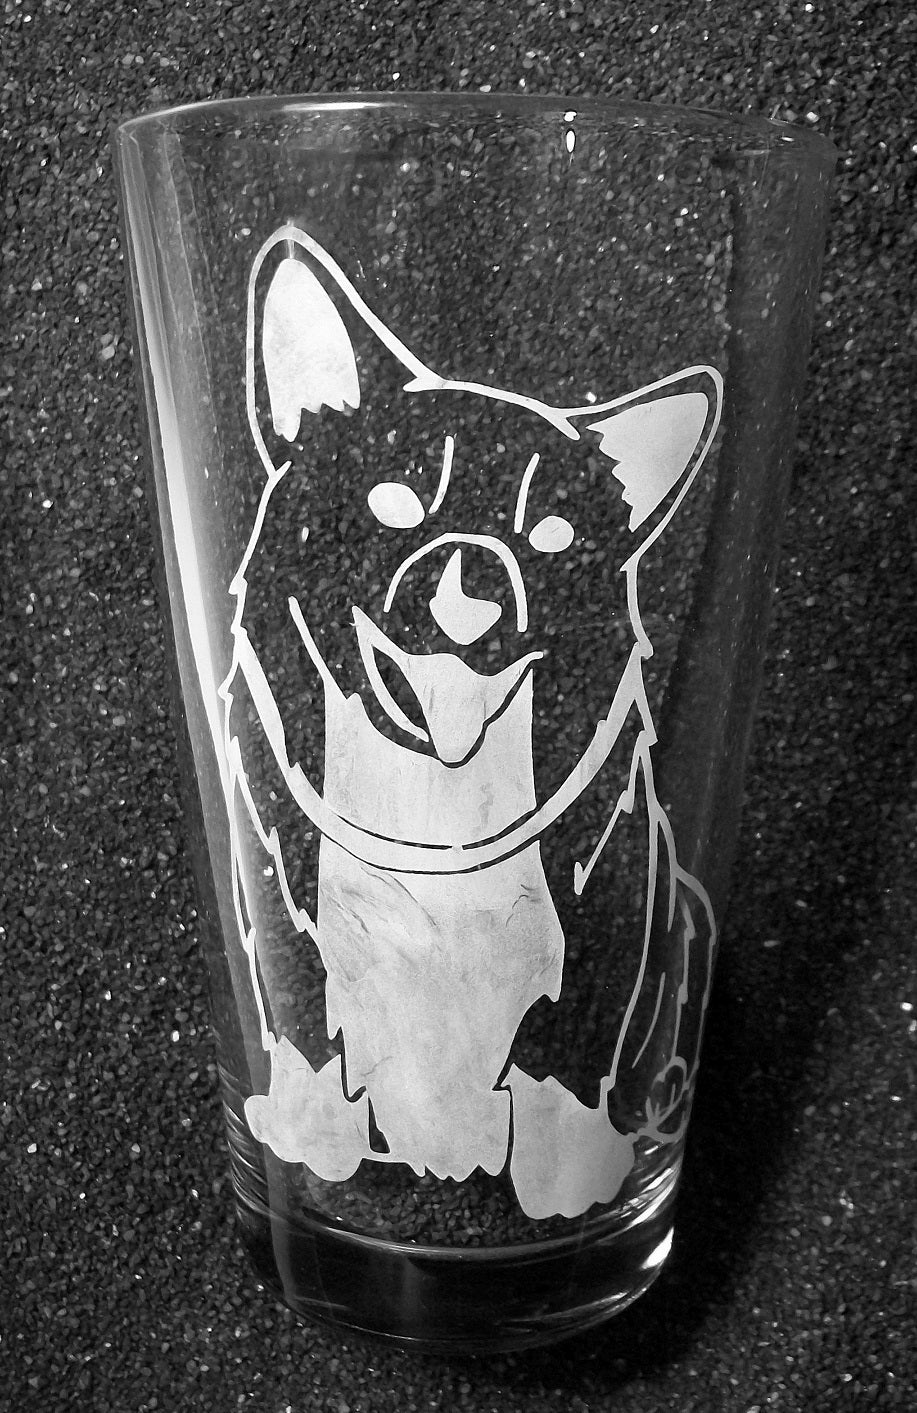 A pint glass with a corgi design. The Corgi faces the viewer, mouth open, tongue out, head tilted to the side. He is sitting and wearing a collar. 